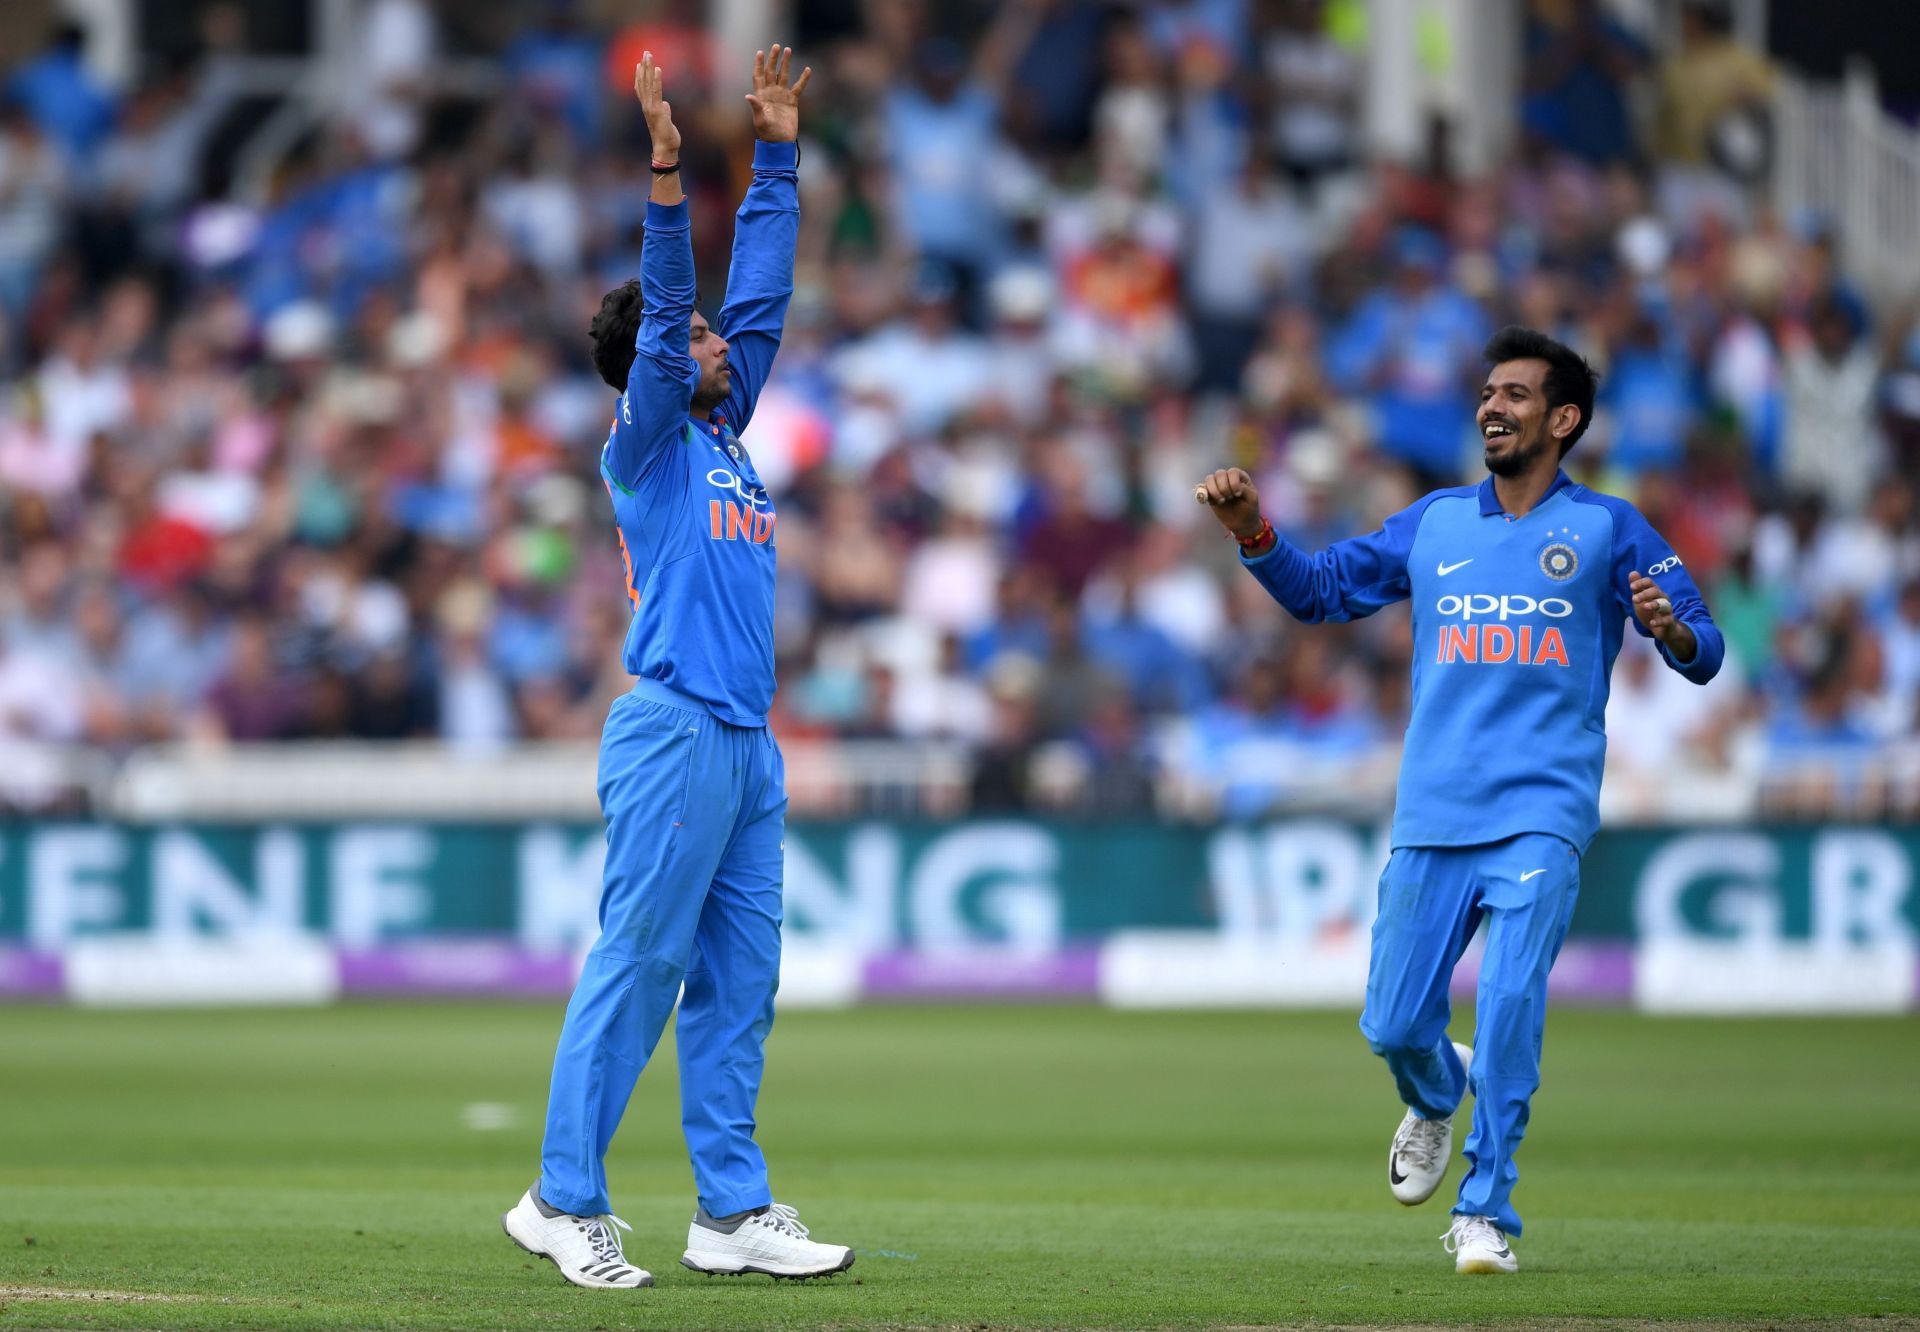 Kuldeep and Chahal are proven match-winners